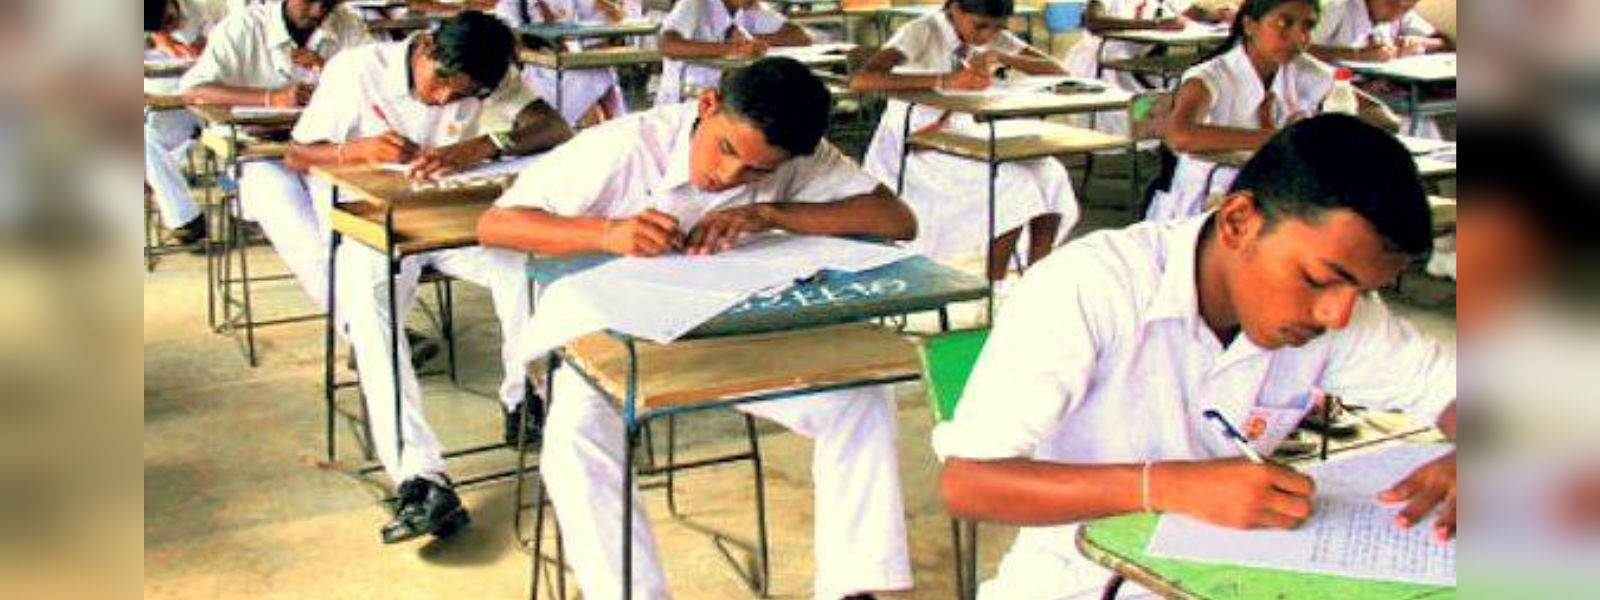 Advanced Level exam results to be released today